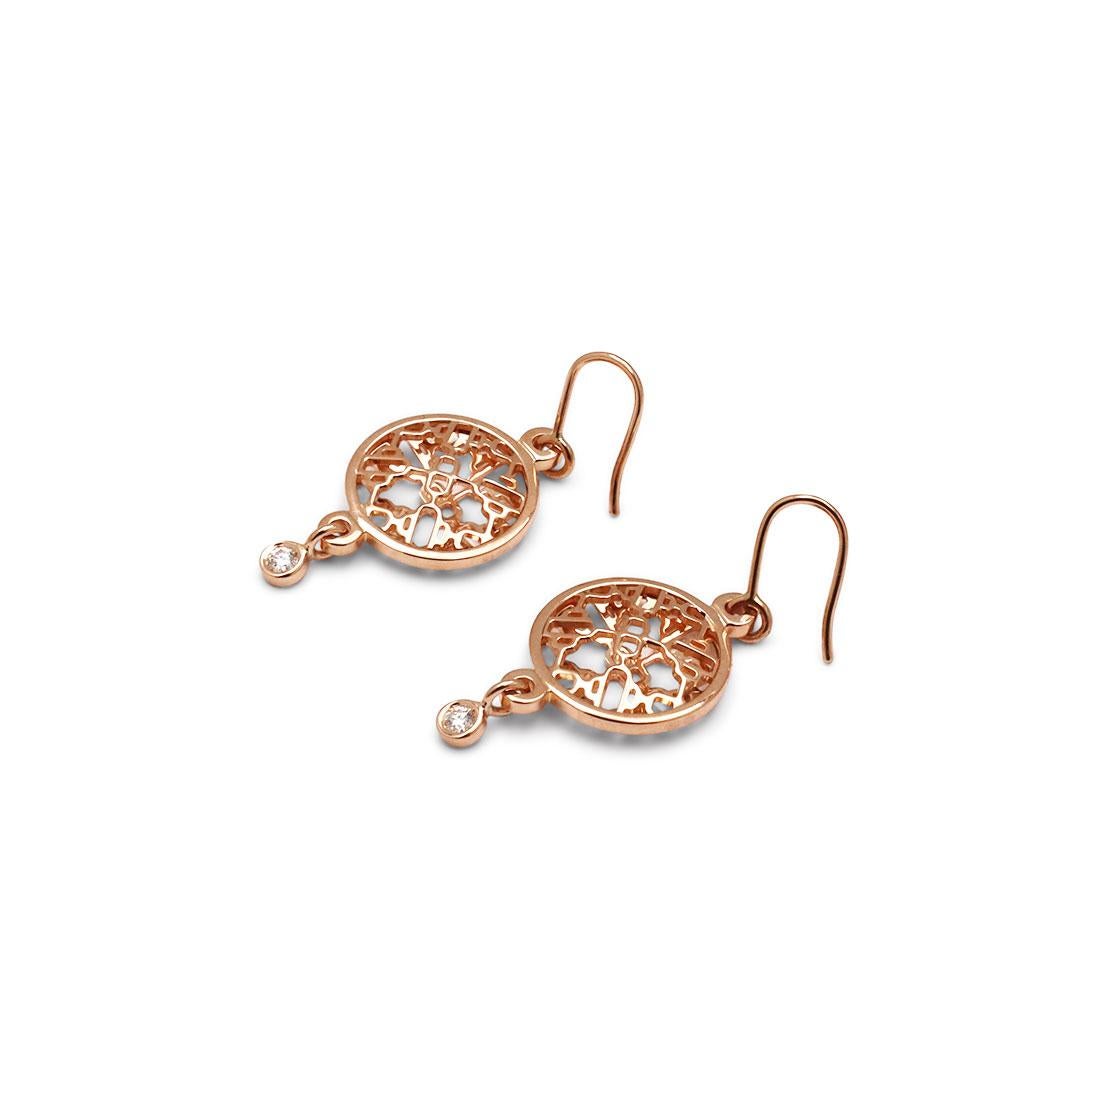 Authentic Hermès Chaine d'Ancre Passerelle earrings crafted in 18 karat rose gold. Each earring is set with one round brilliant cut diamond for an estimated total carat weight of .08. Signed Hermès, Au750, Made in Italy, with serial number. The